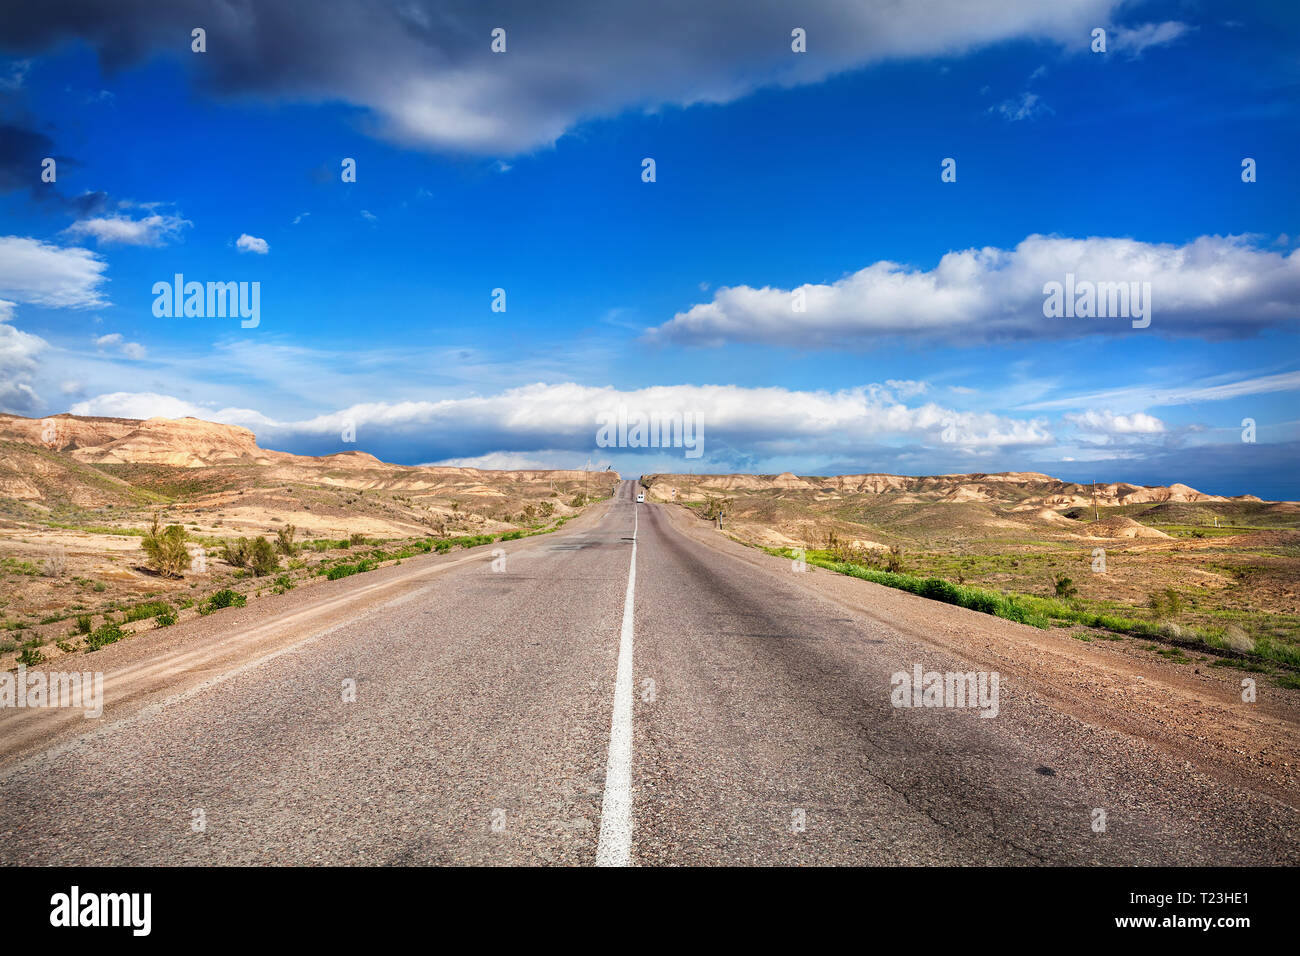 Highway road in the desert and cloudy blue sky Stock Photo